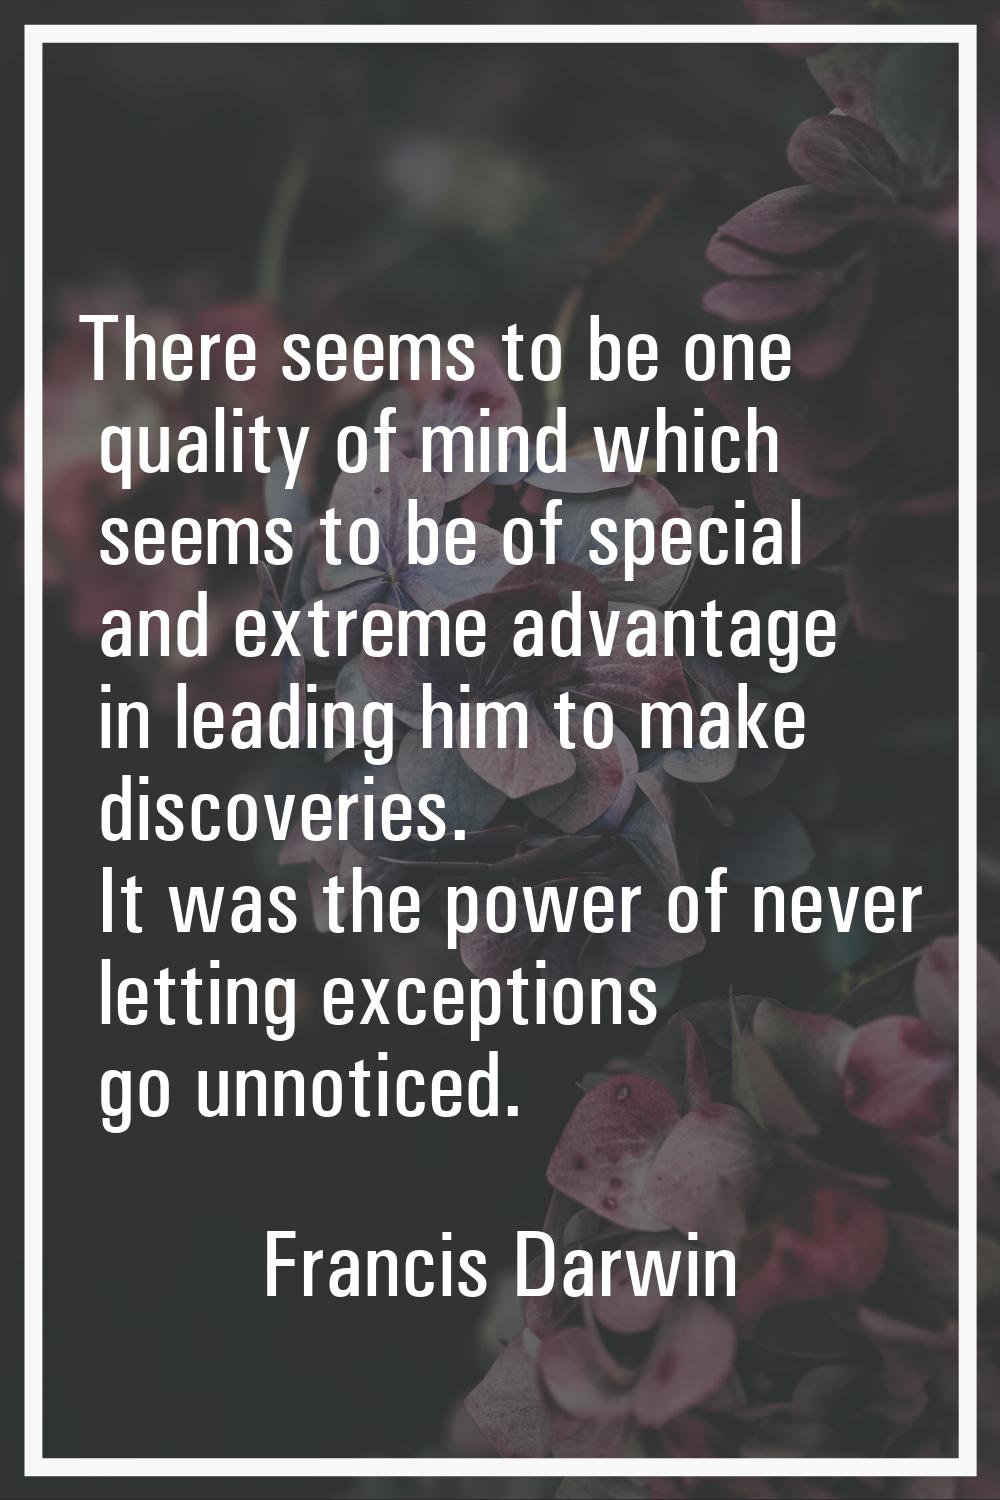 There seems to be one quality of mind which seems to be of special and extreme advantage in leading